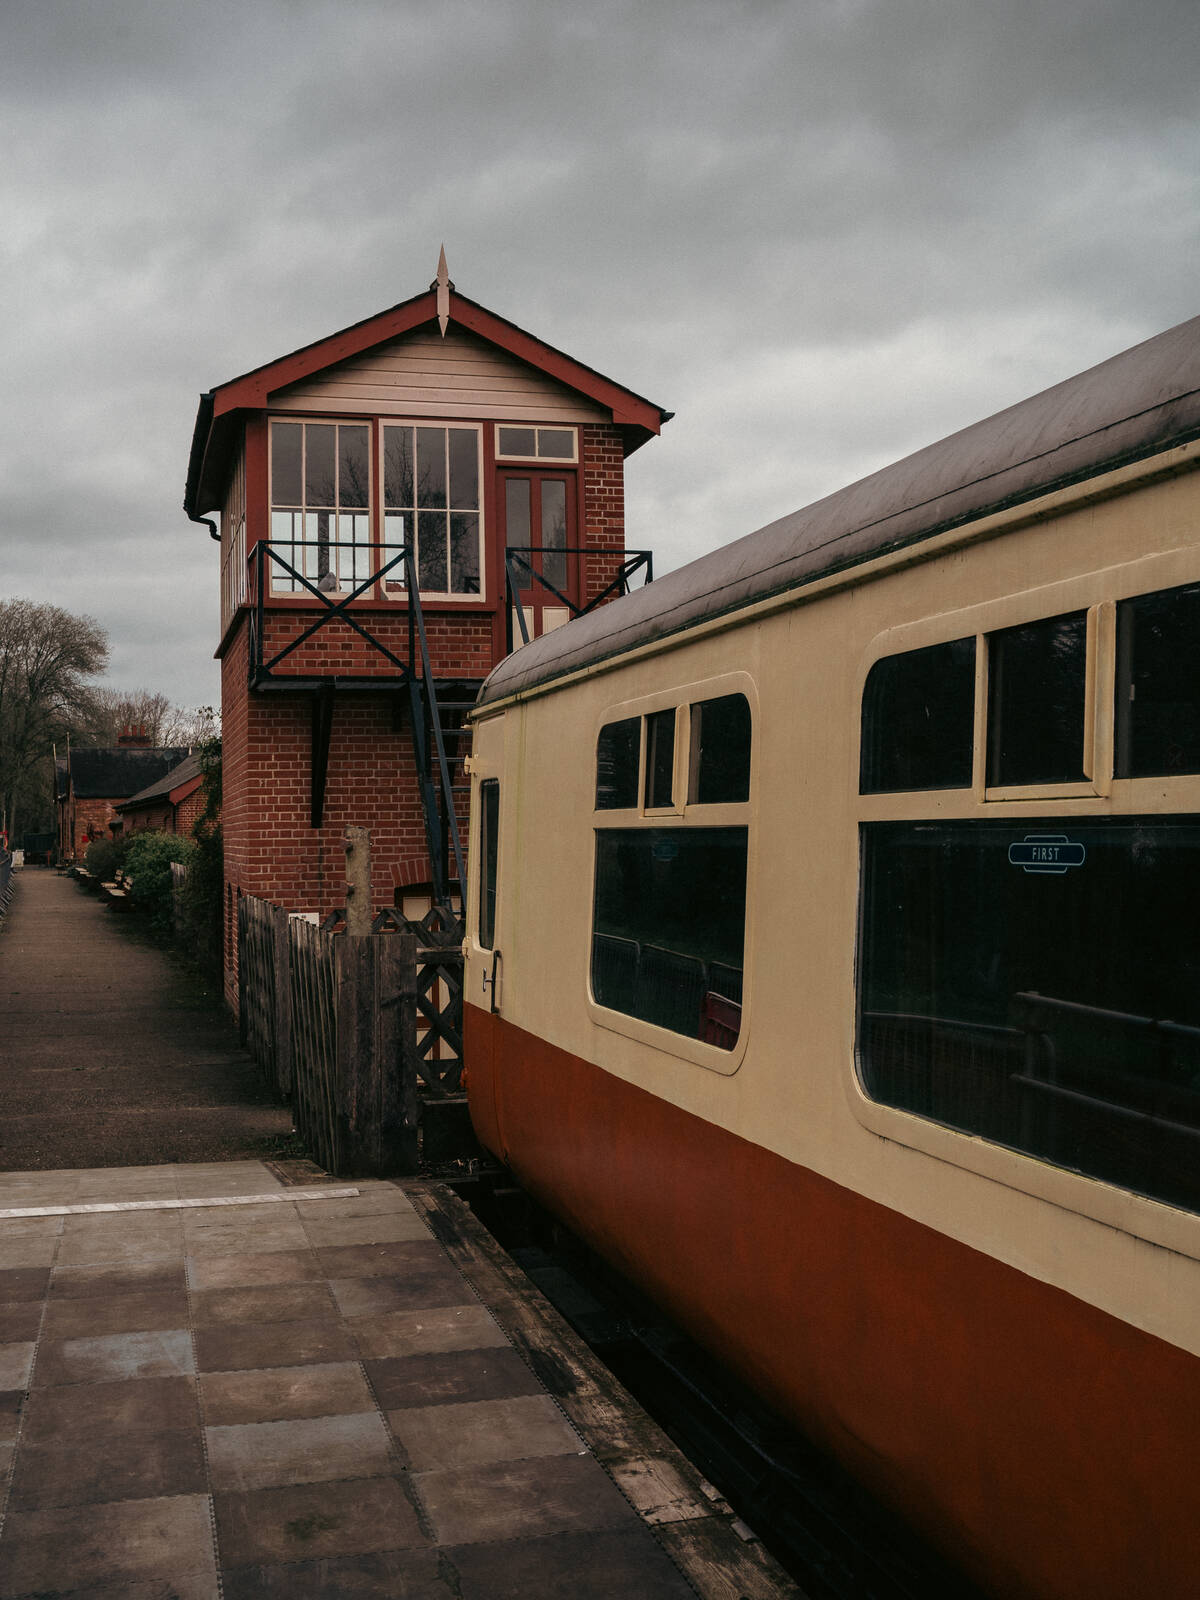 Image of Whitwell and Reepham Station by James Billings.